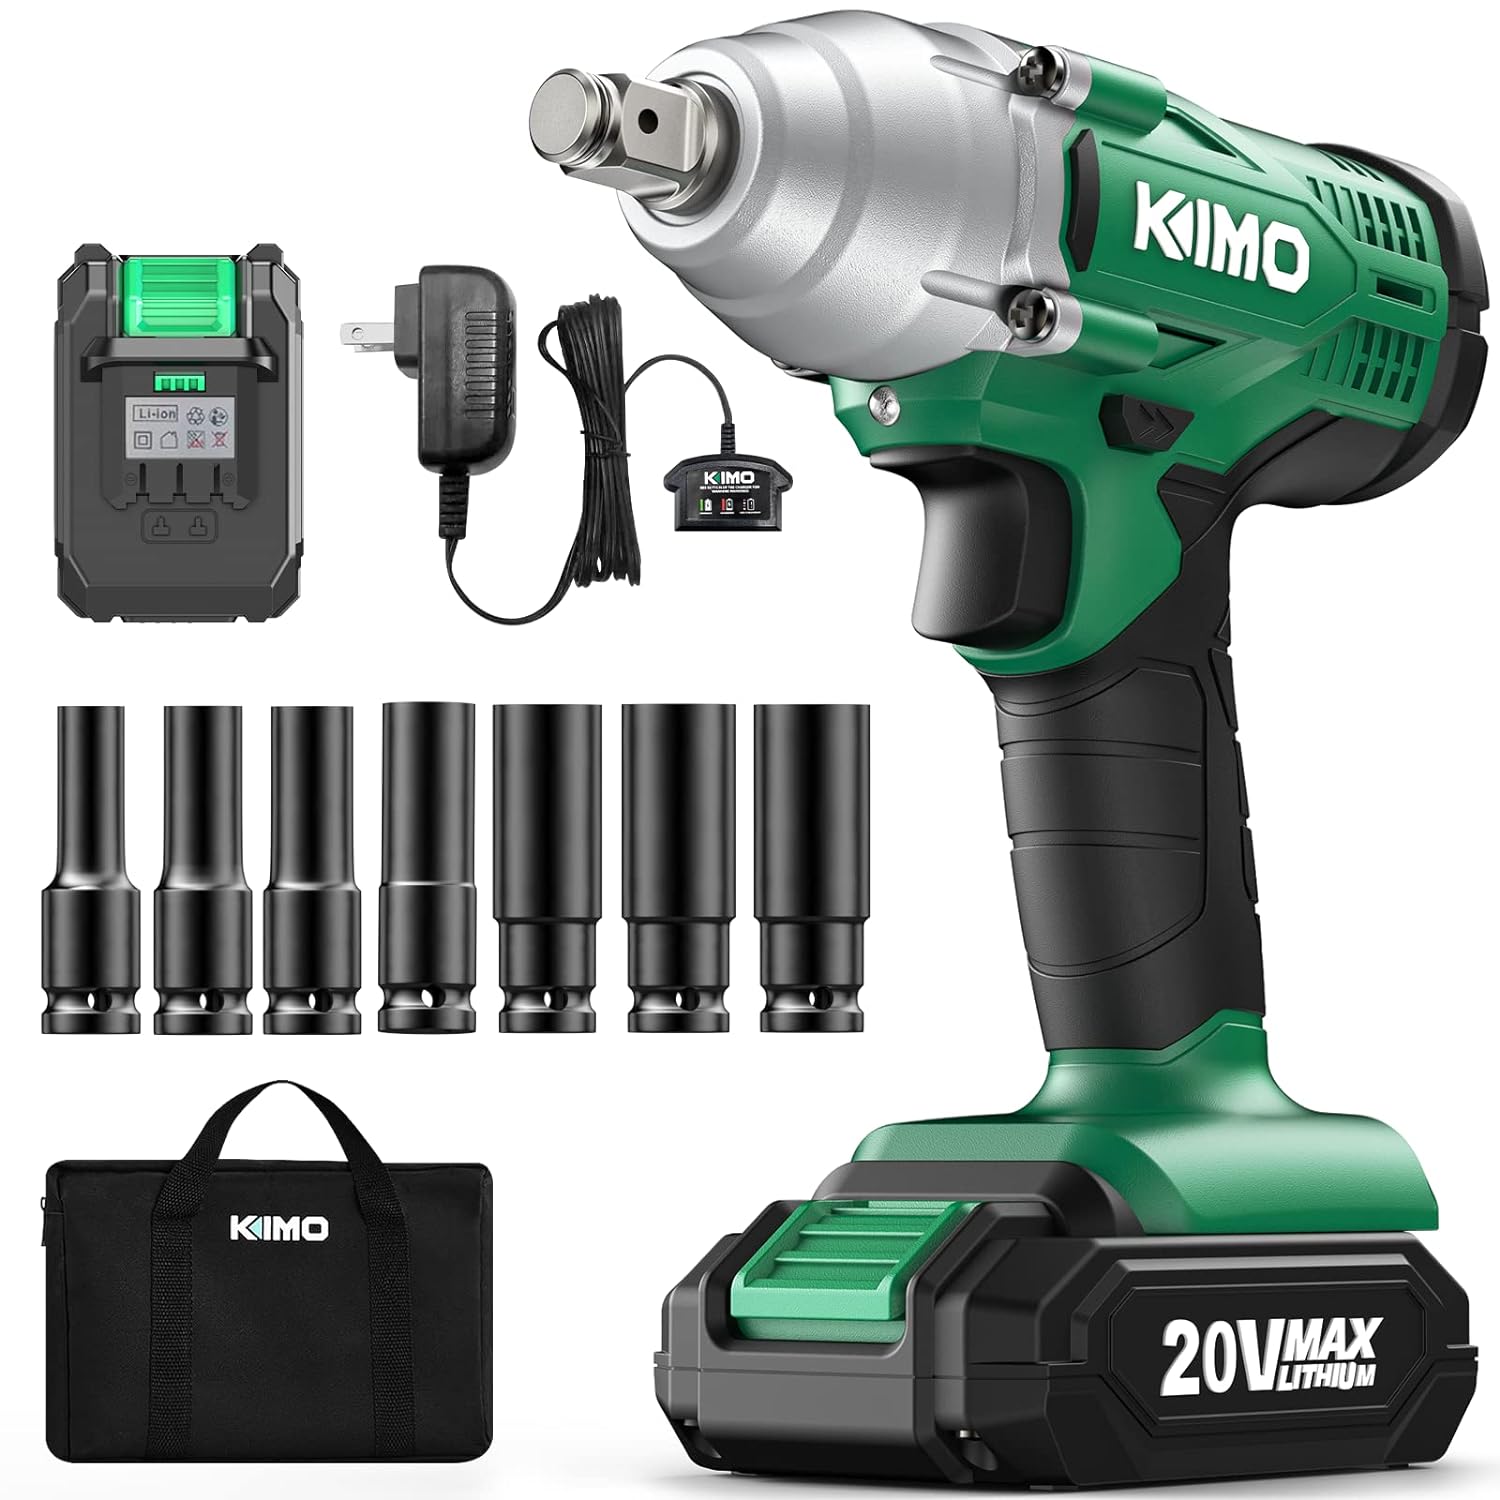 Great Choice Products Kimo 20V Cordless Impact Wrench 1/2 Inch, 2000 In-Lbs & High Torque 3400 Ipm, Impact Gun W/ Battery & Charger, 7 Pcs Impact D…